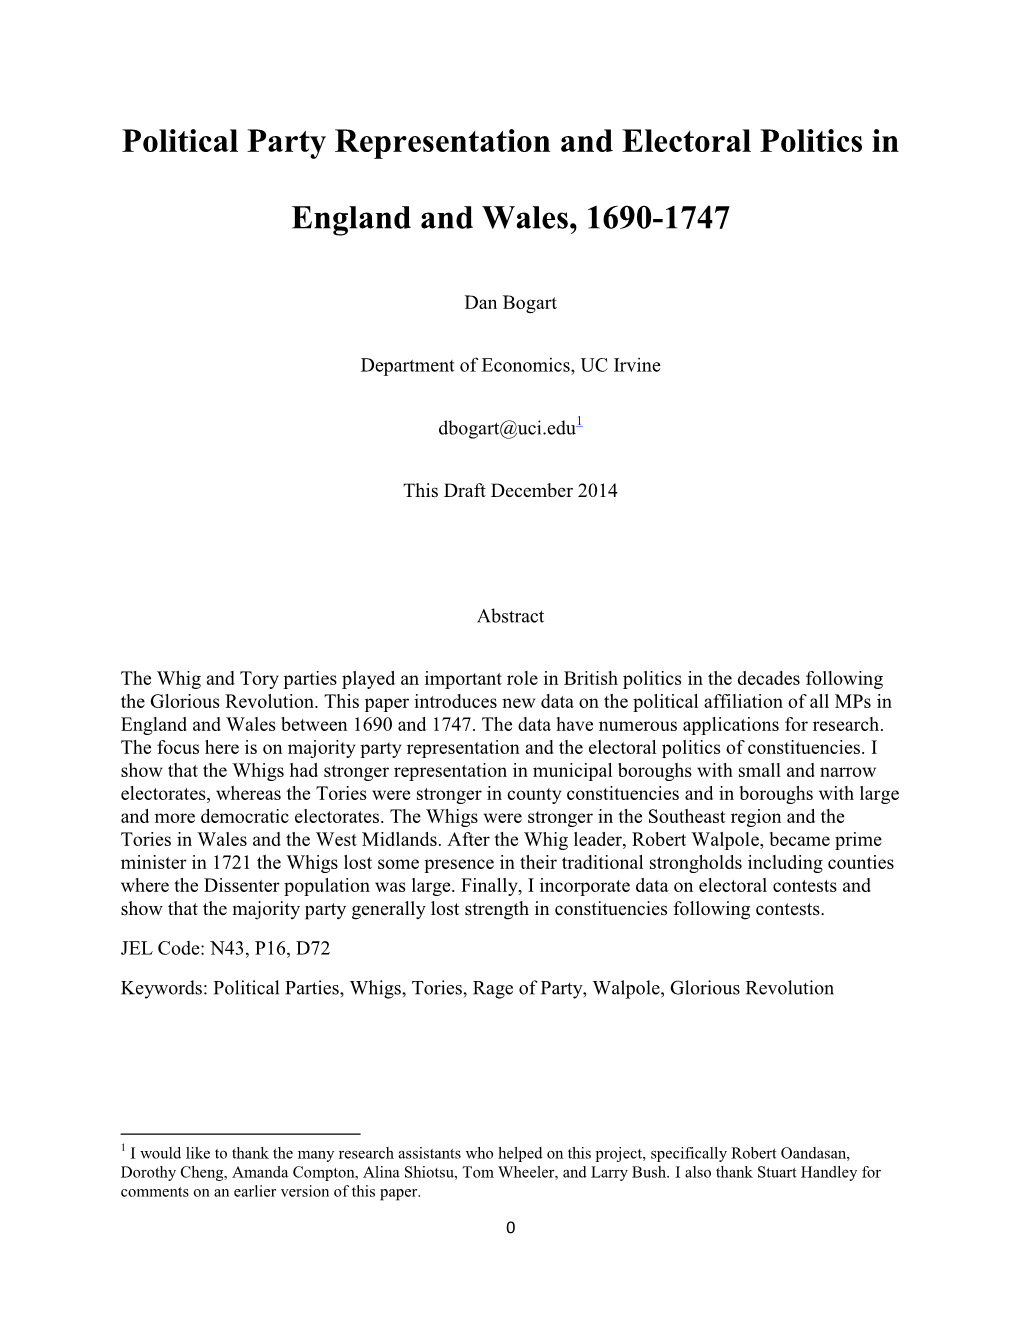 Political Party Representation and Electoral Politics in England And